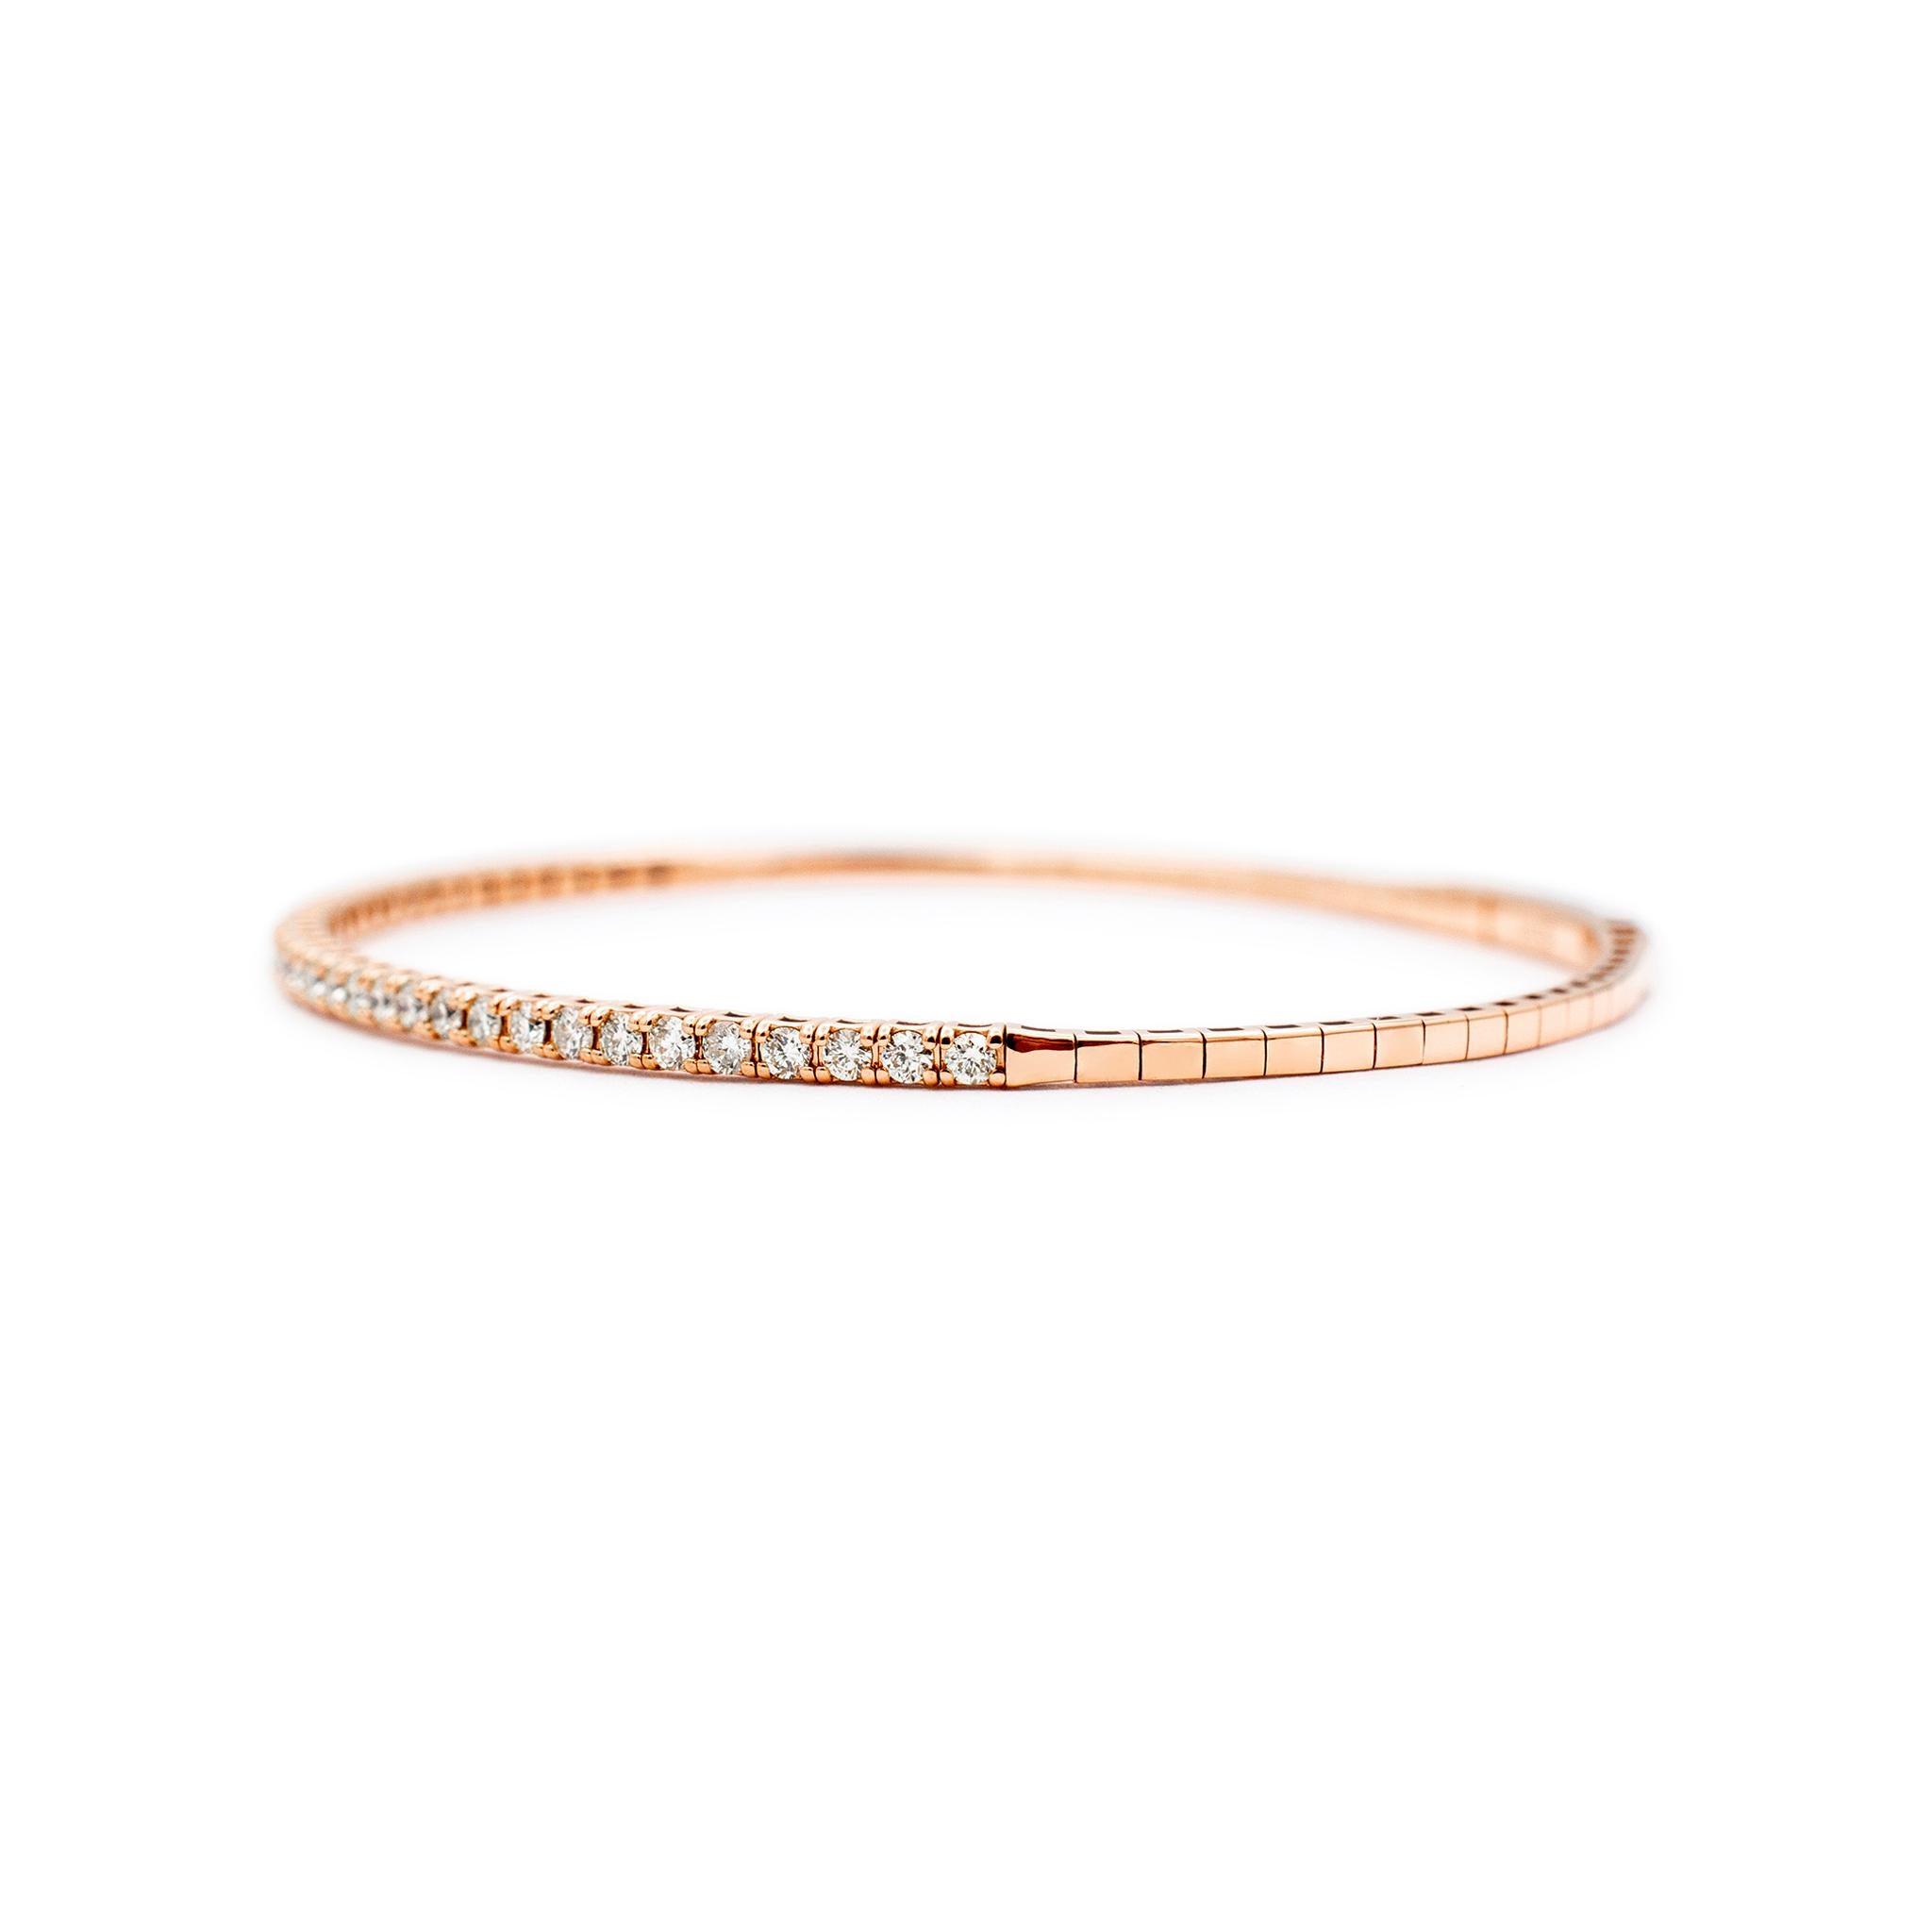 Gender: Ladies

Metal Type: 14K Rose Gold

Length: 6.50 inches

Width: 2.60 mm

Weight: 5.75 grams

Ladies custom made polished 14K rose gold, diamond tennis bracelet. The bracelet measures approximately 6.50 inches in length by 2.60 mm in width and